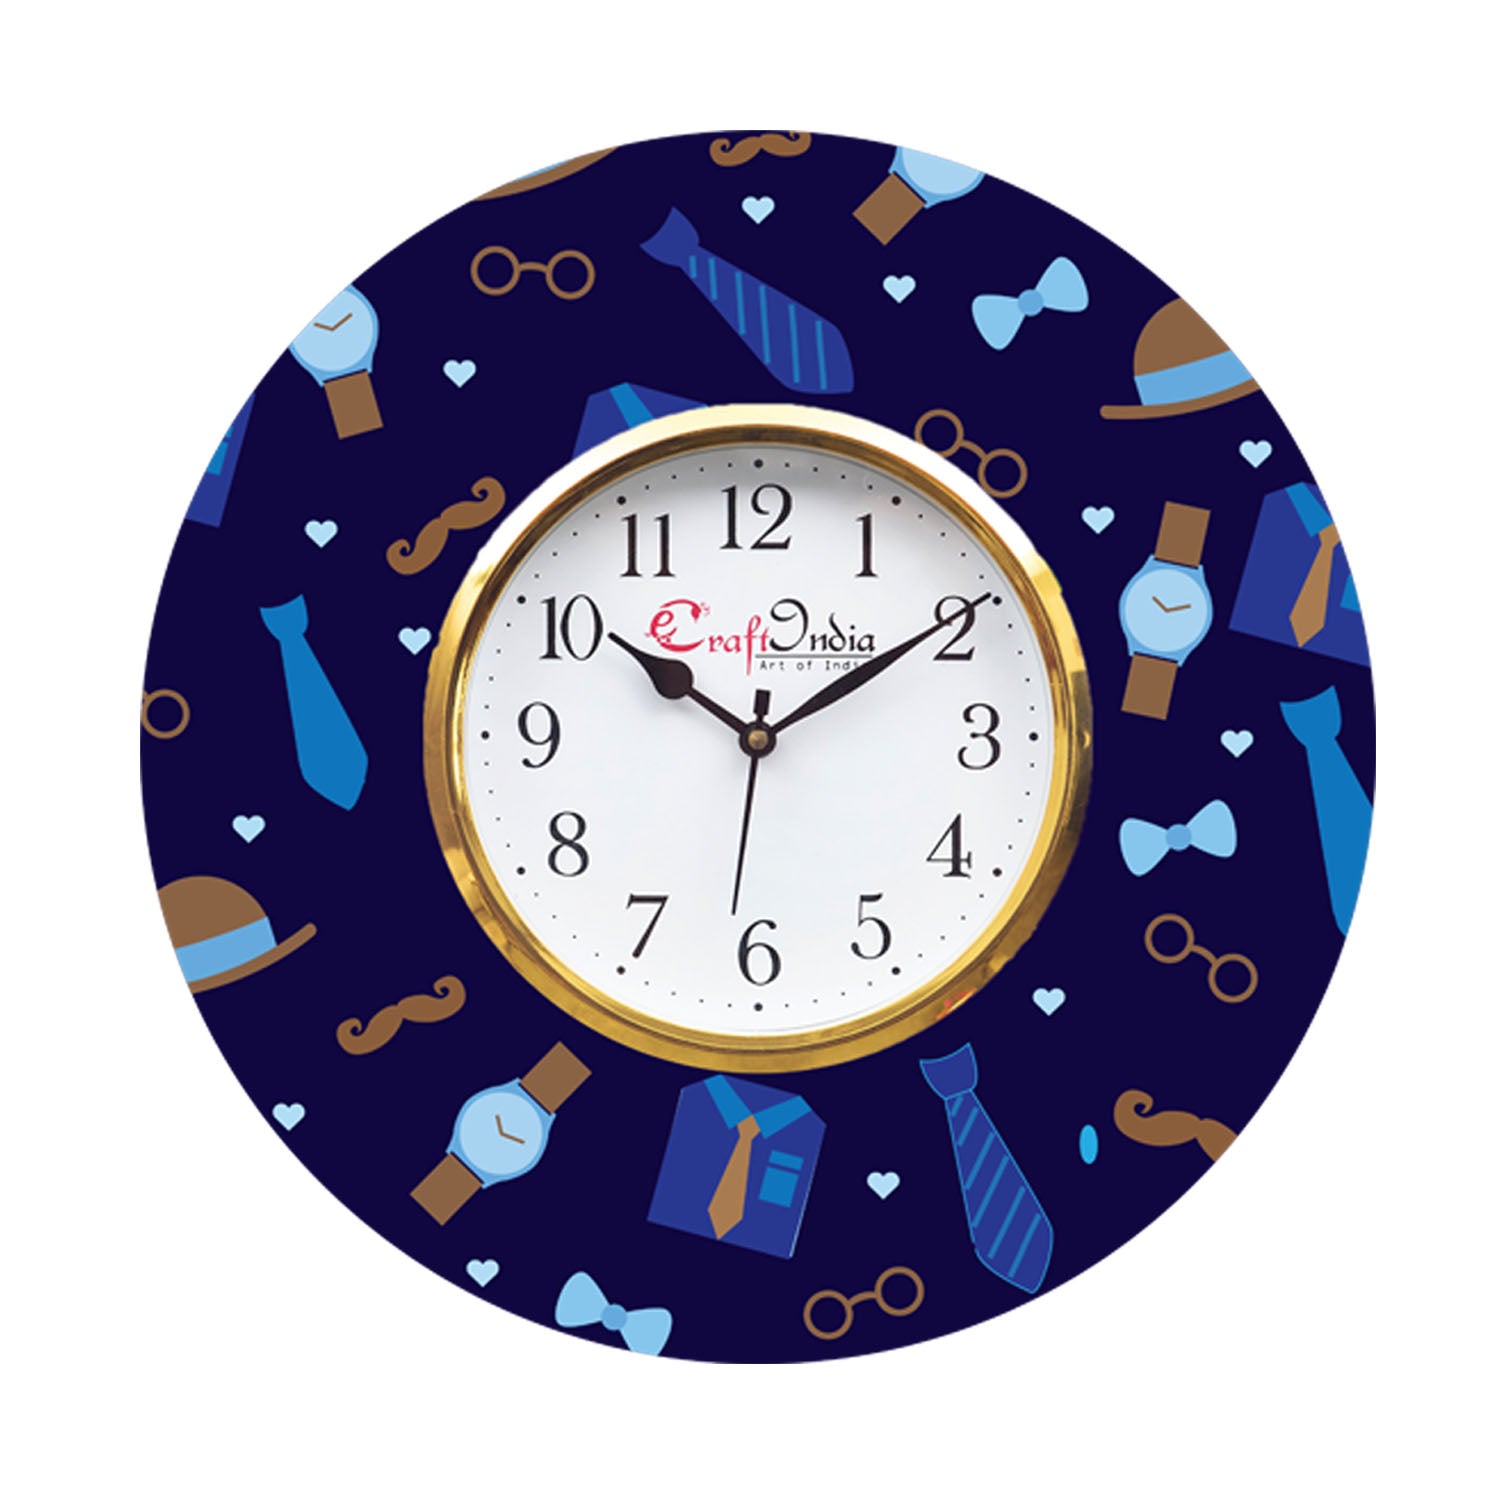 Love Gift with Tie, Specs, Watch and Moustache Theme Wooden Colorful Round Wall Clock